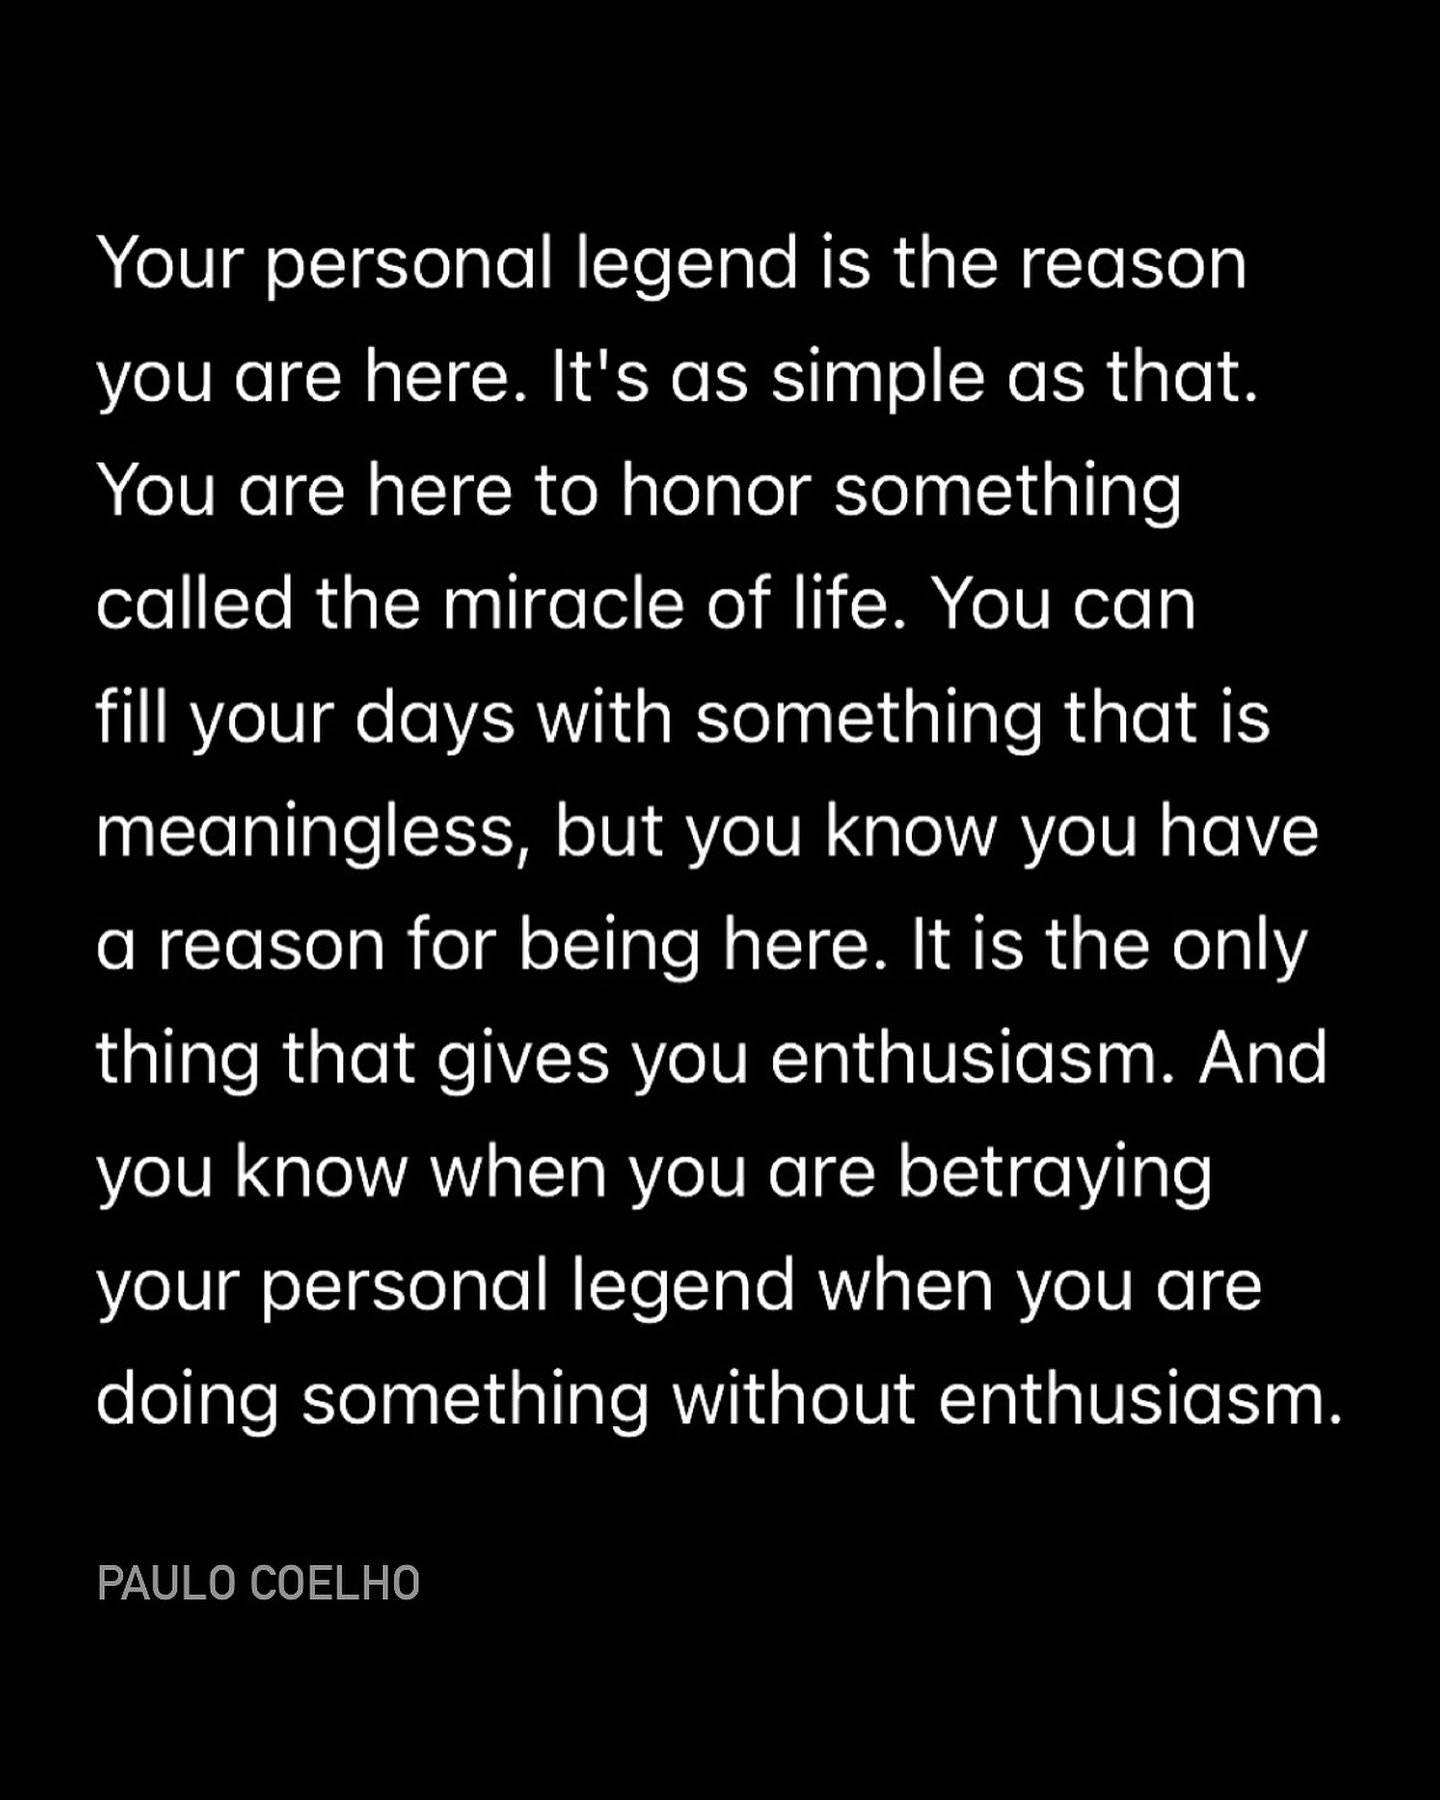 &ldquo;You know when you are betraying your personal legend when you are doing something without enthusiasm.&rdquo;

What do you think of Paulo Coelho&rsquo;s assessment of what he calls your &ldquo;personal legend&rdquo;?

Drop a ❤️ if it resonates.